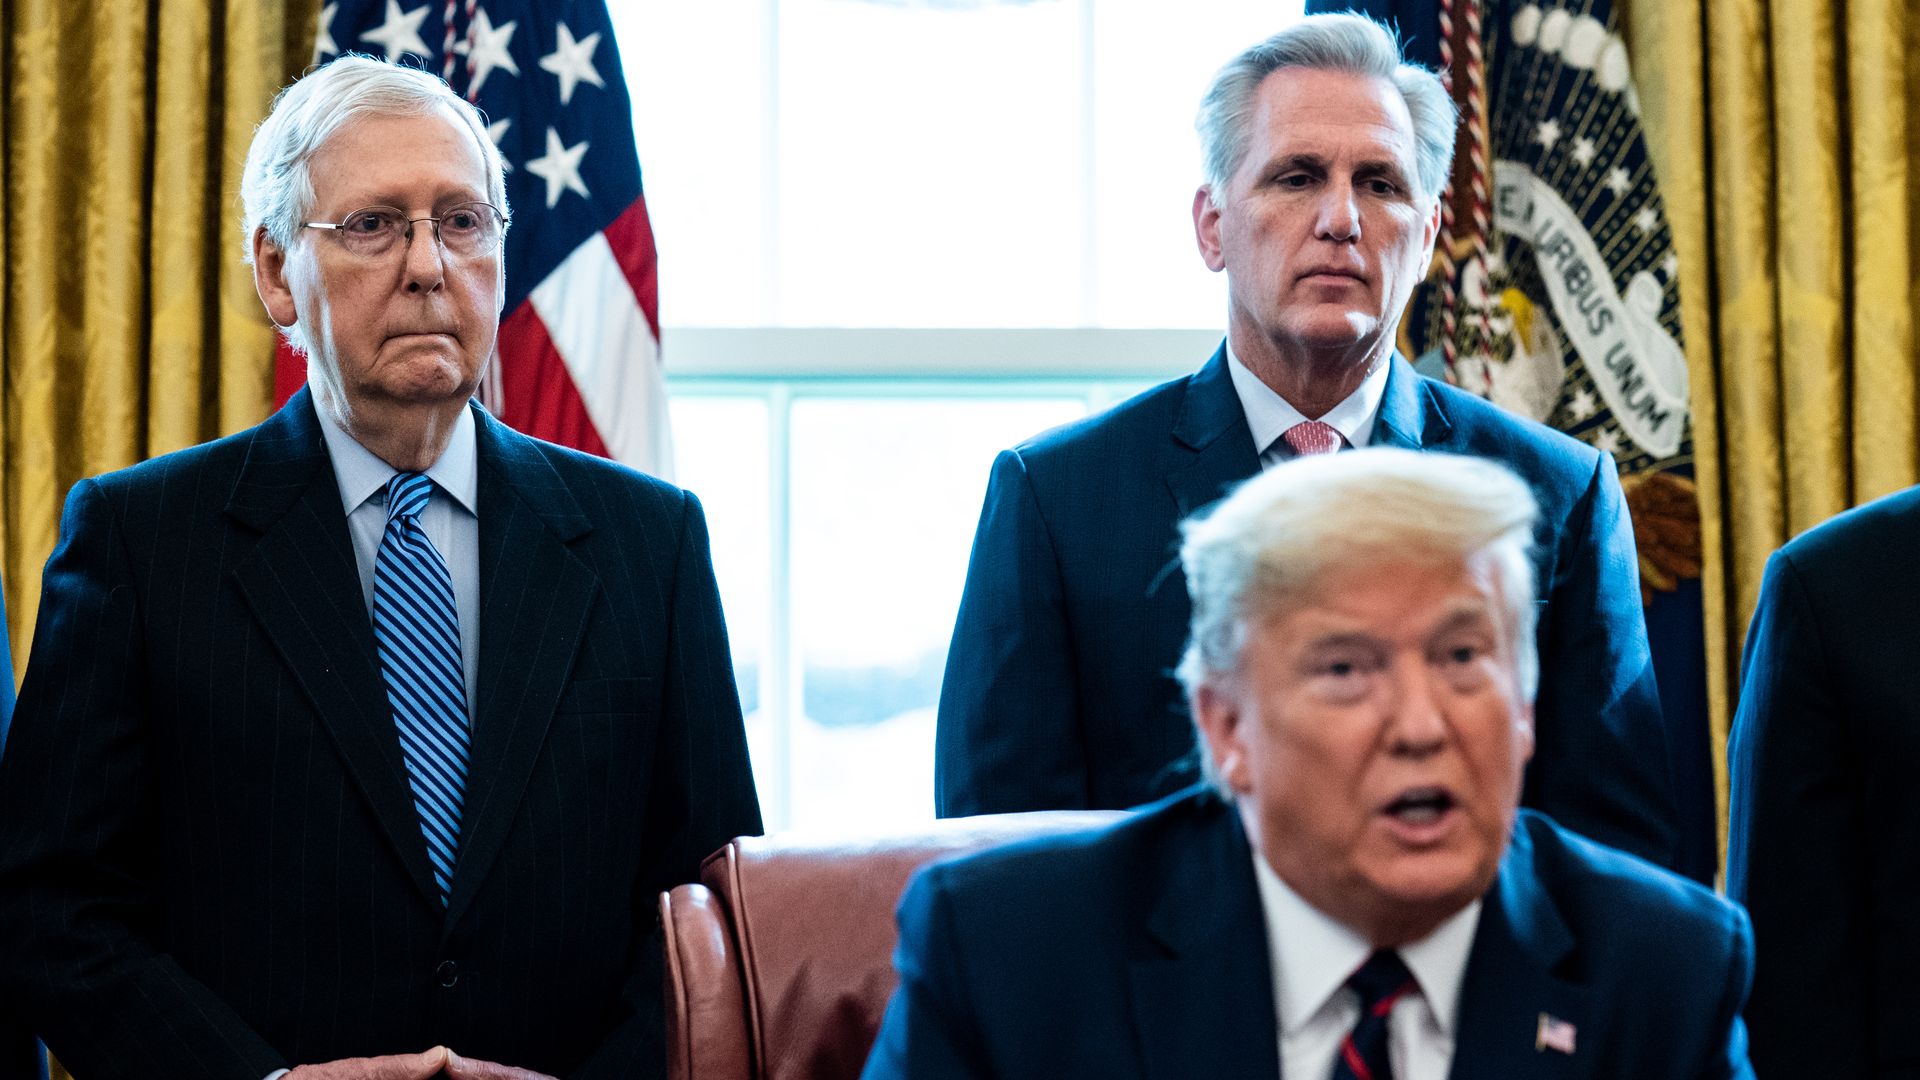 Senate Majority Leader Mitch McConnell (R-KY), House Minority Leader Kevin McCarthy (R-CA) and President Trump